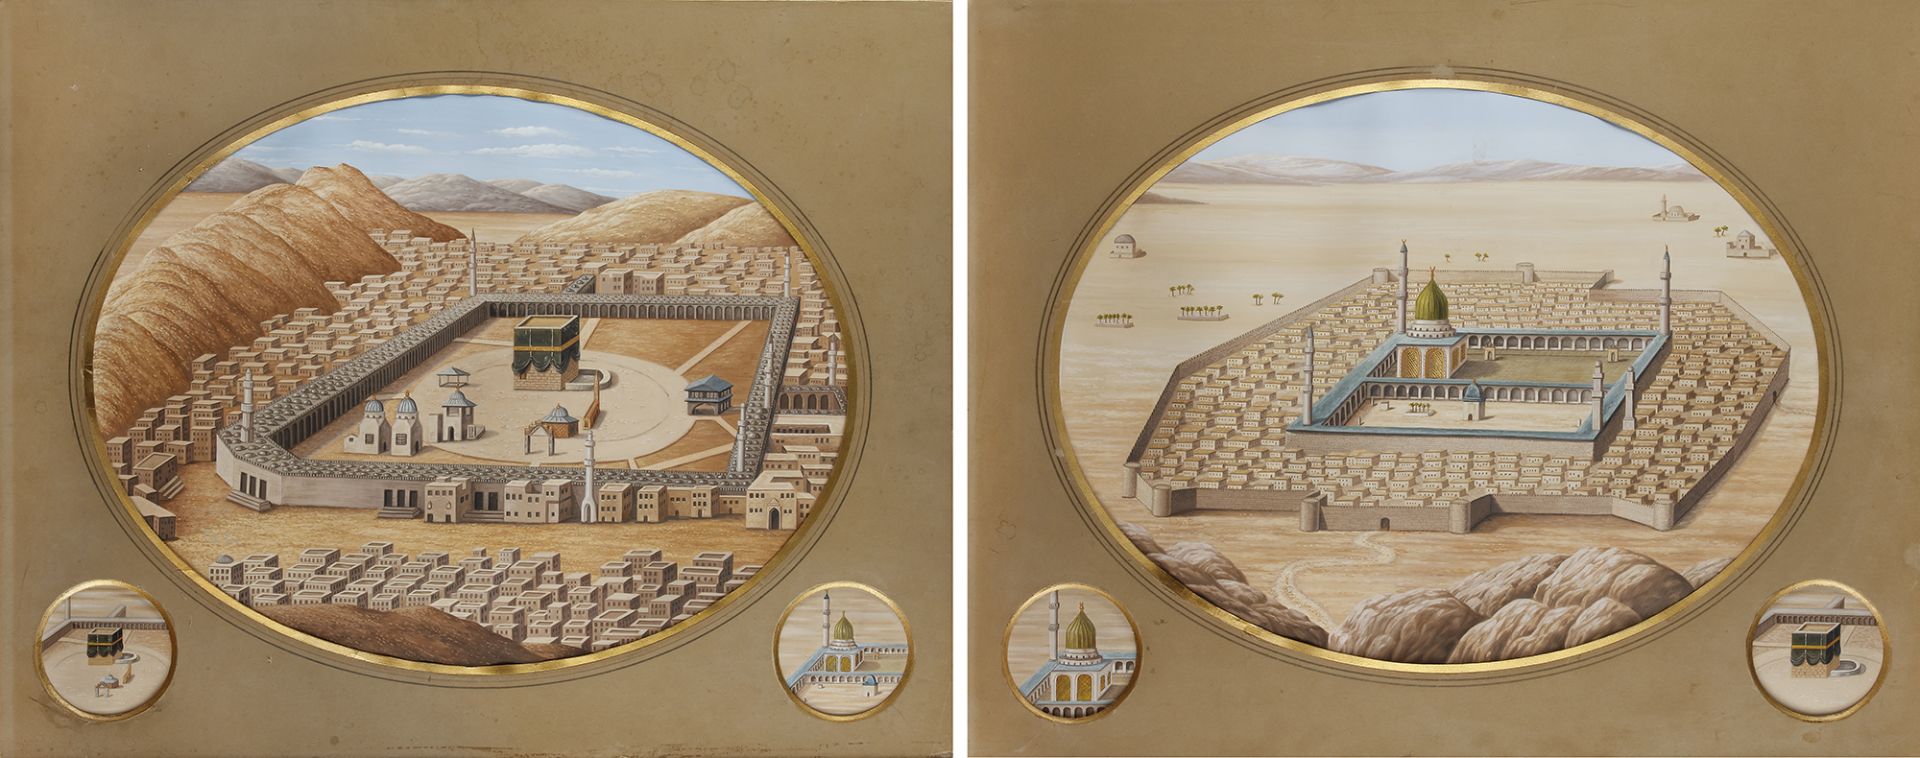 A PAIR OF PAINTINGS DEPICTING MECCA AND MEDINA, OTTOMAN TURKEY, 19TH CENTURY